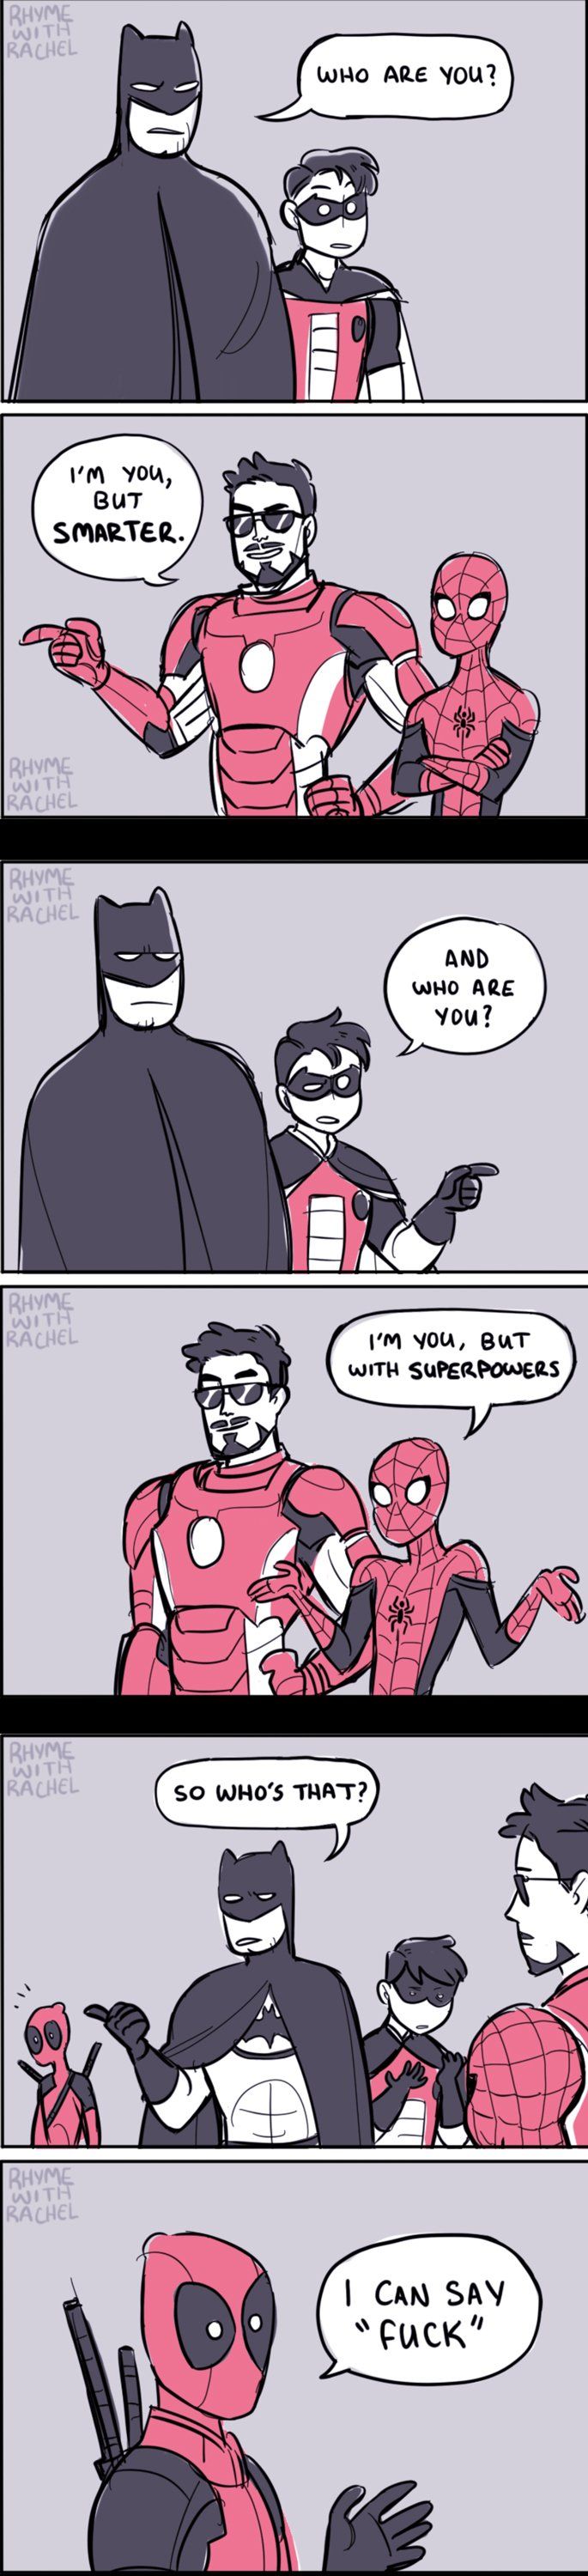 Marvel & DC counterparts.